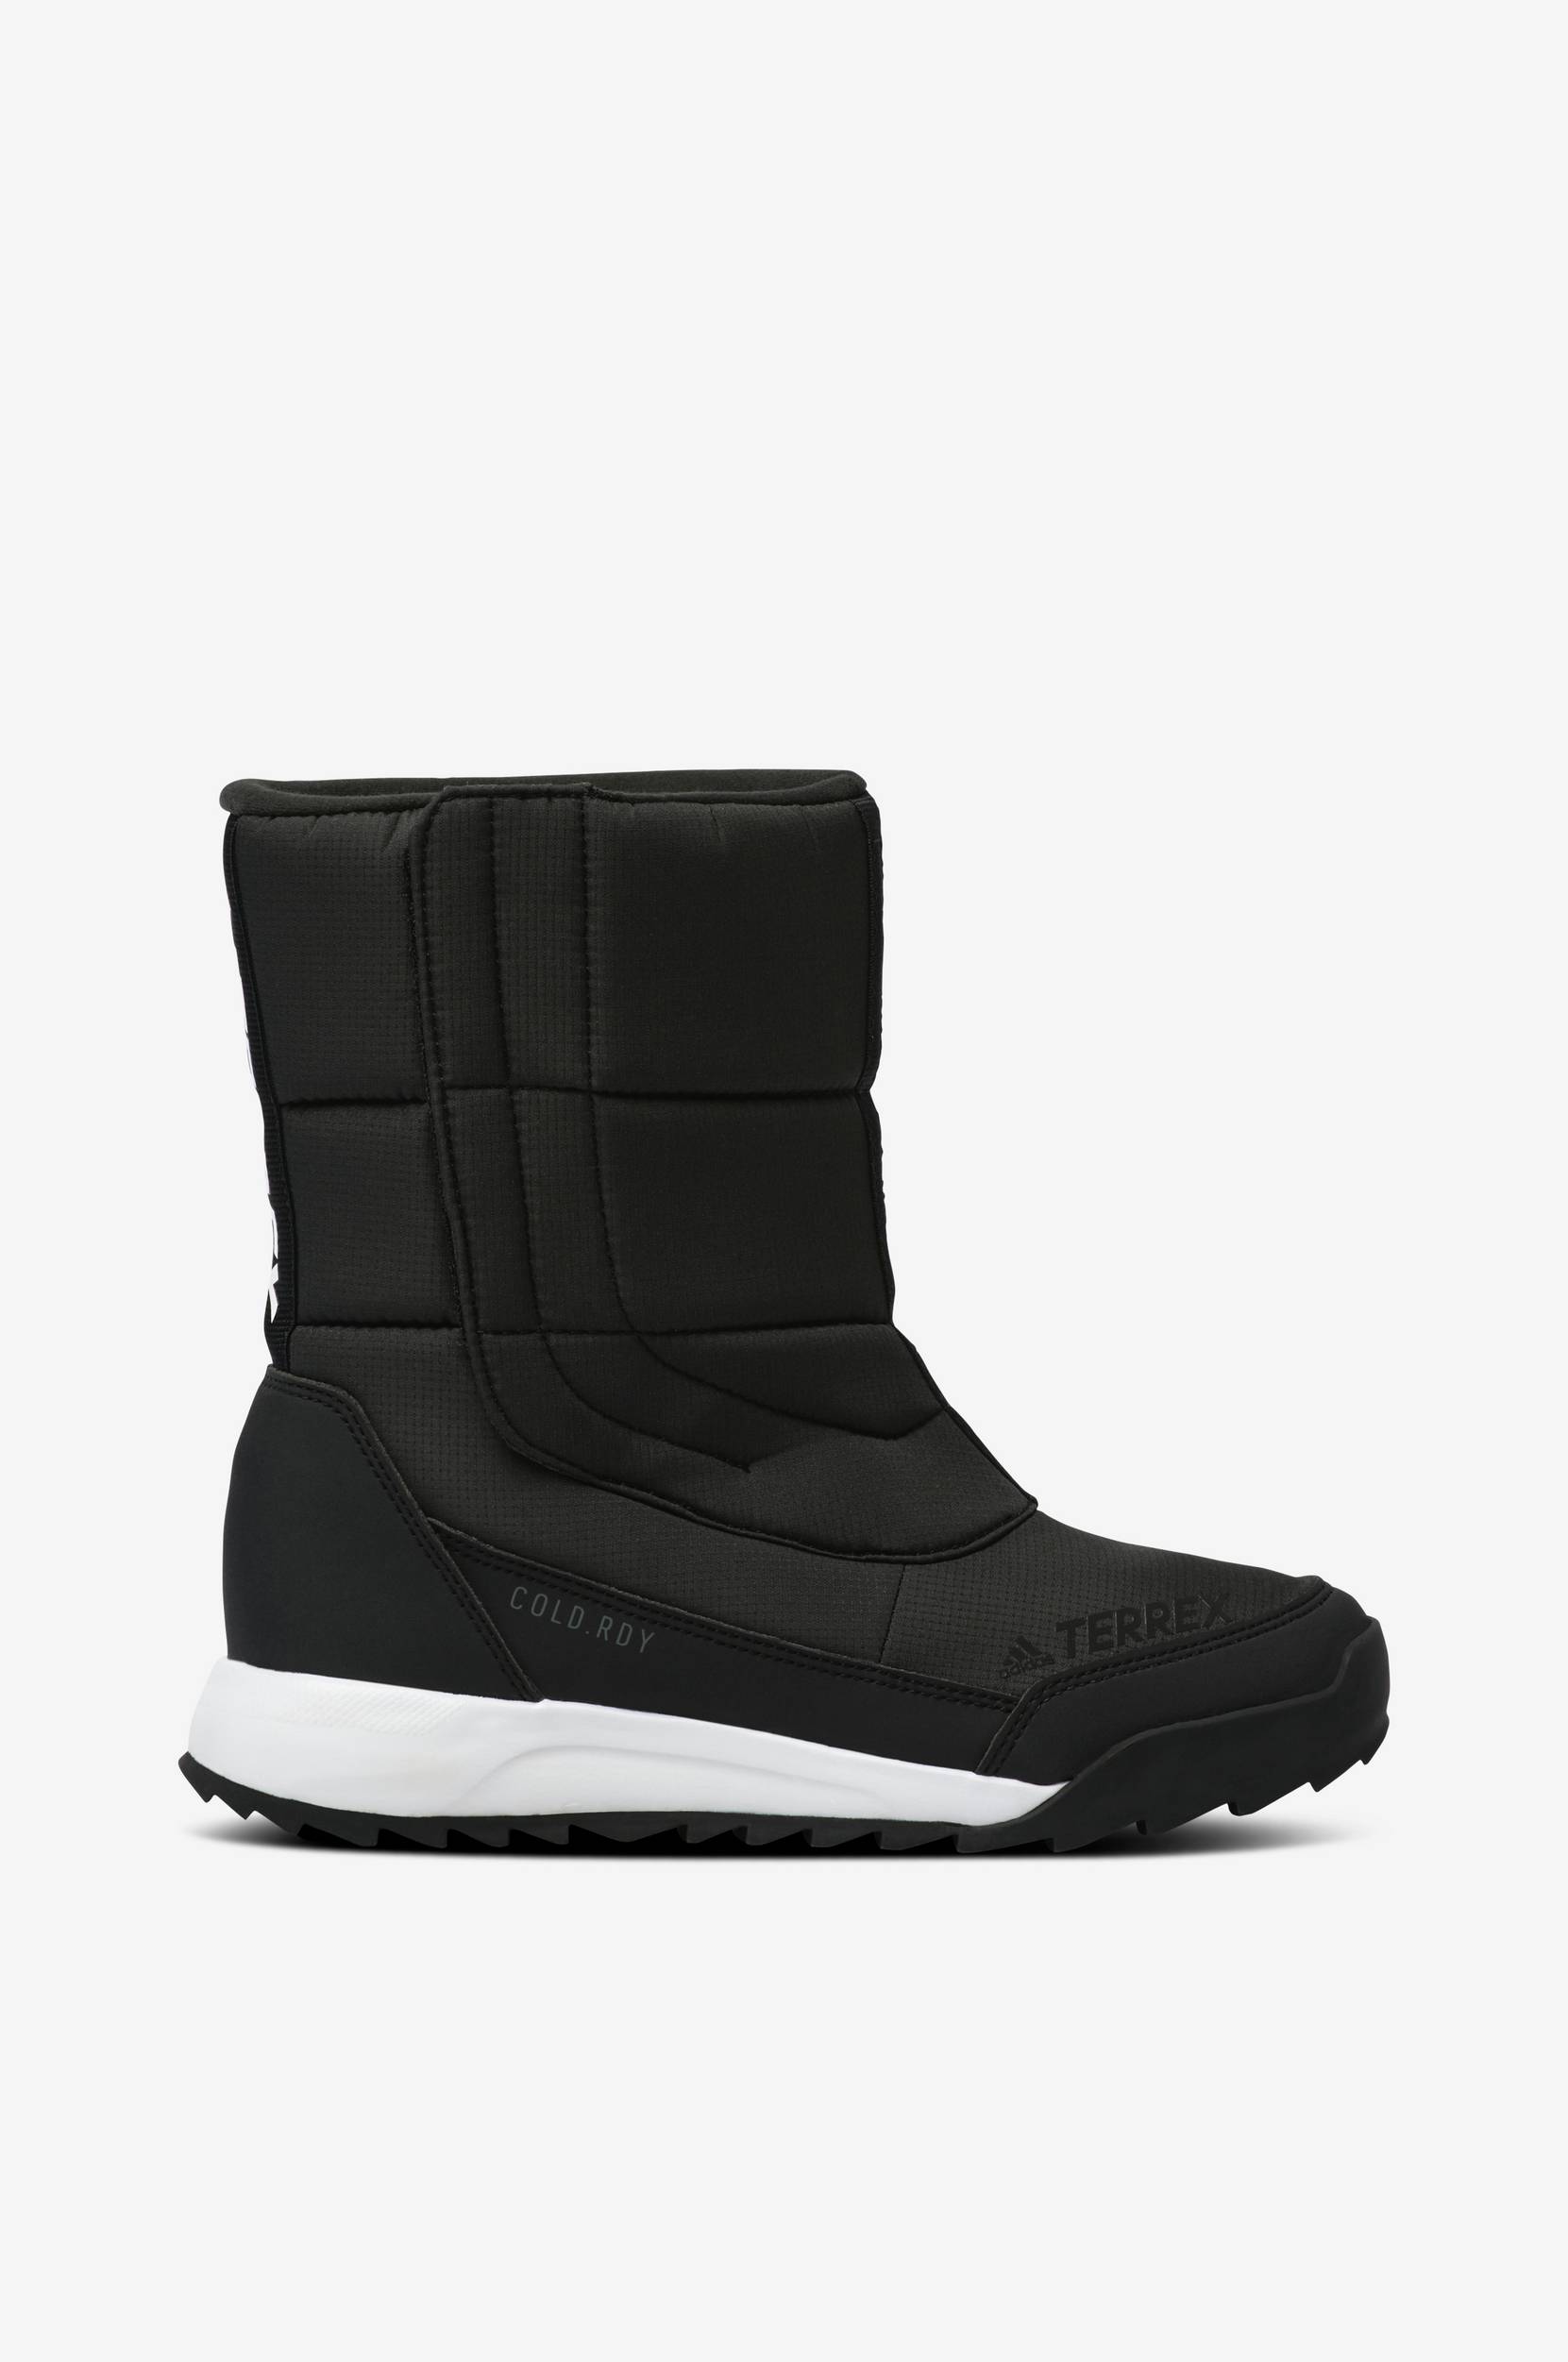 adidas Sport Performance - Boots Terrex Choleah Cold.rdy Boots - Sort - 37